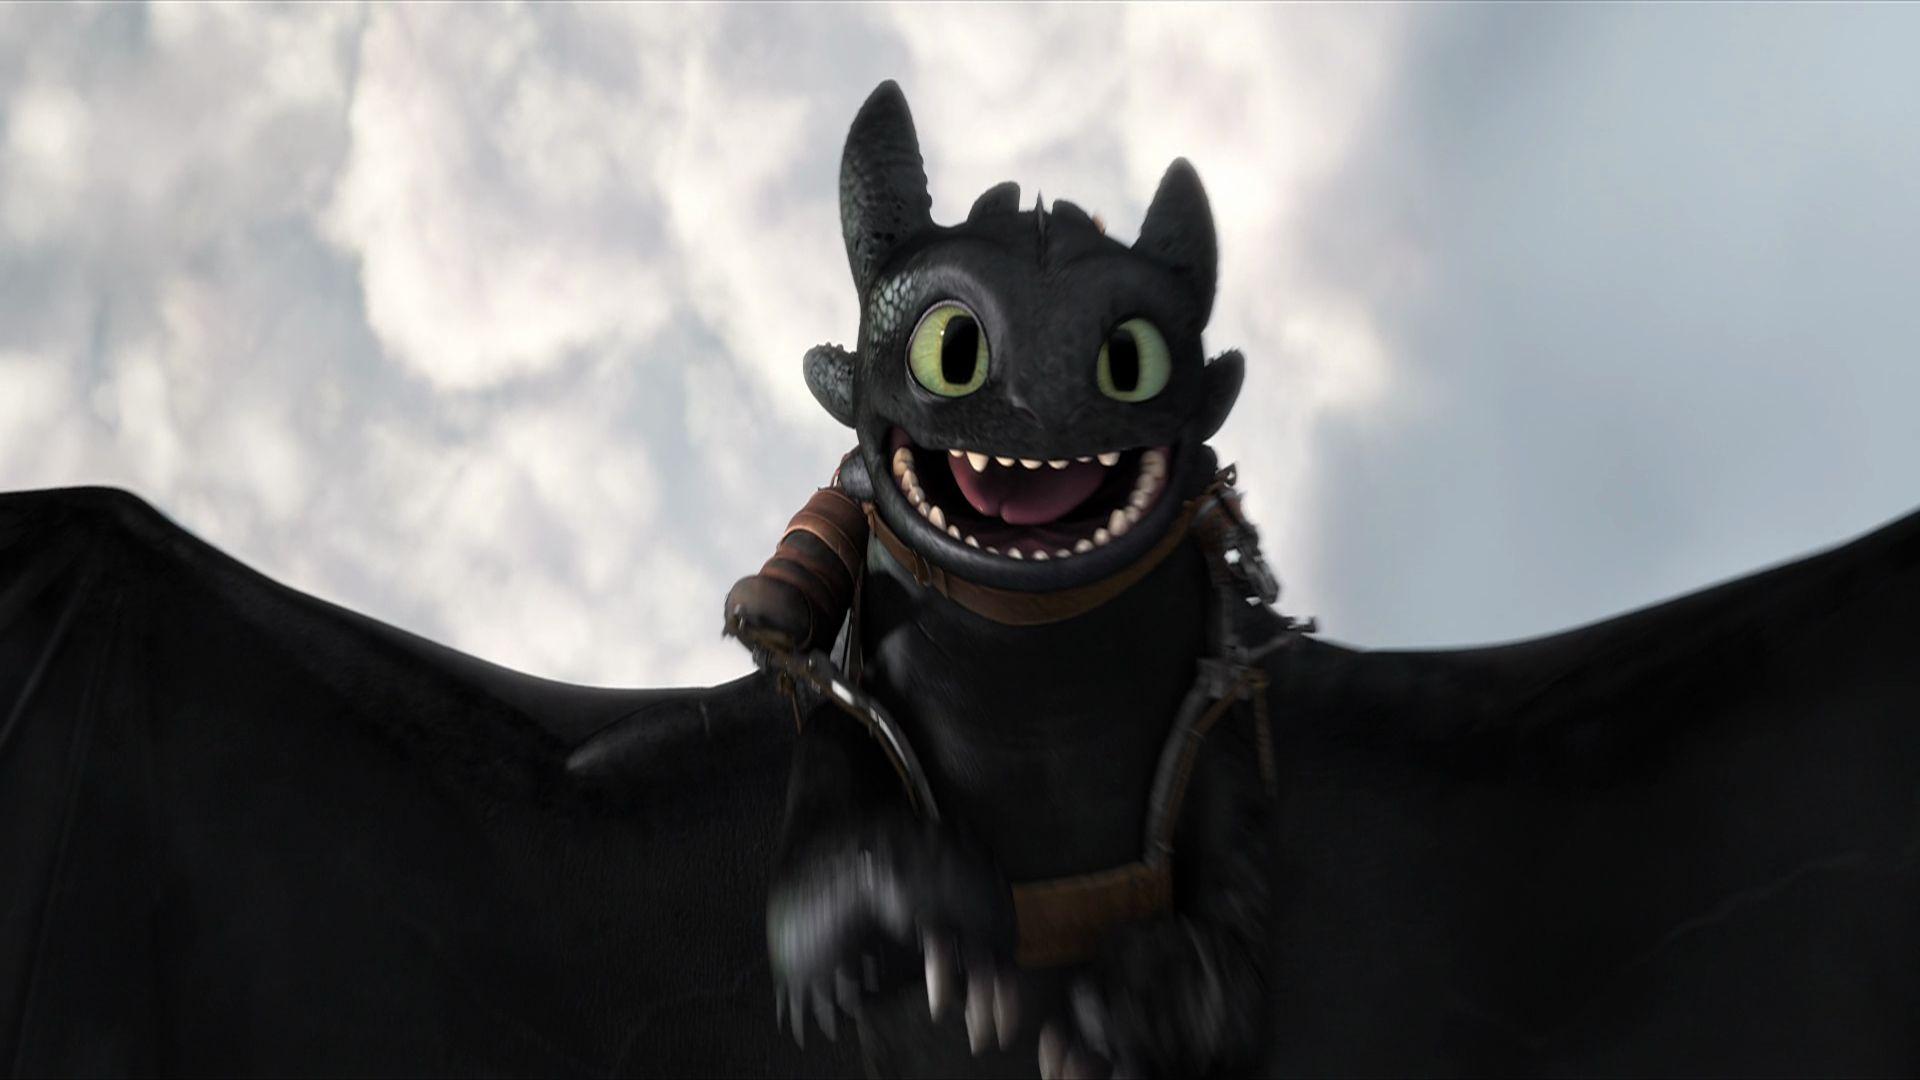 Toothless The Dragon Wallpaper How To Train Your Dragon 2 Full HD